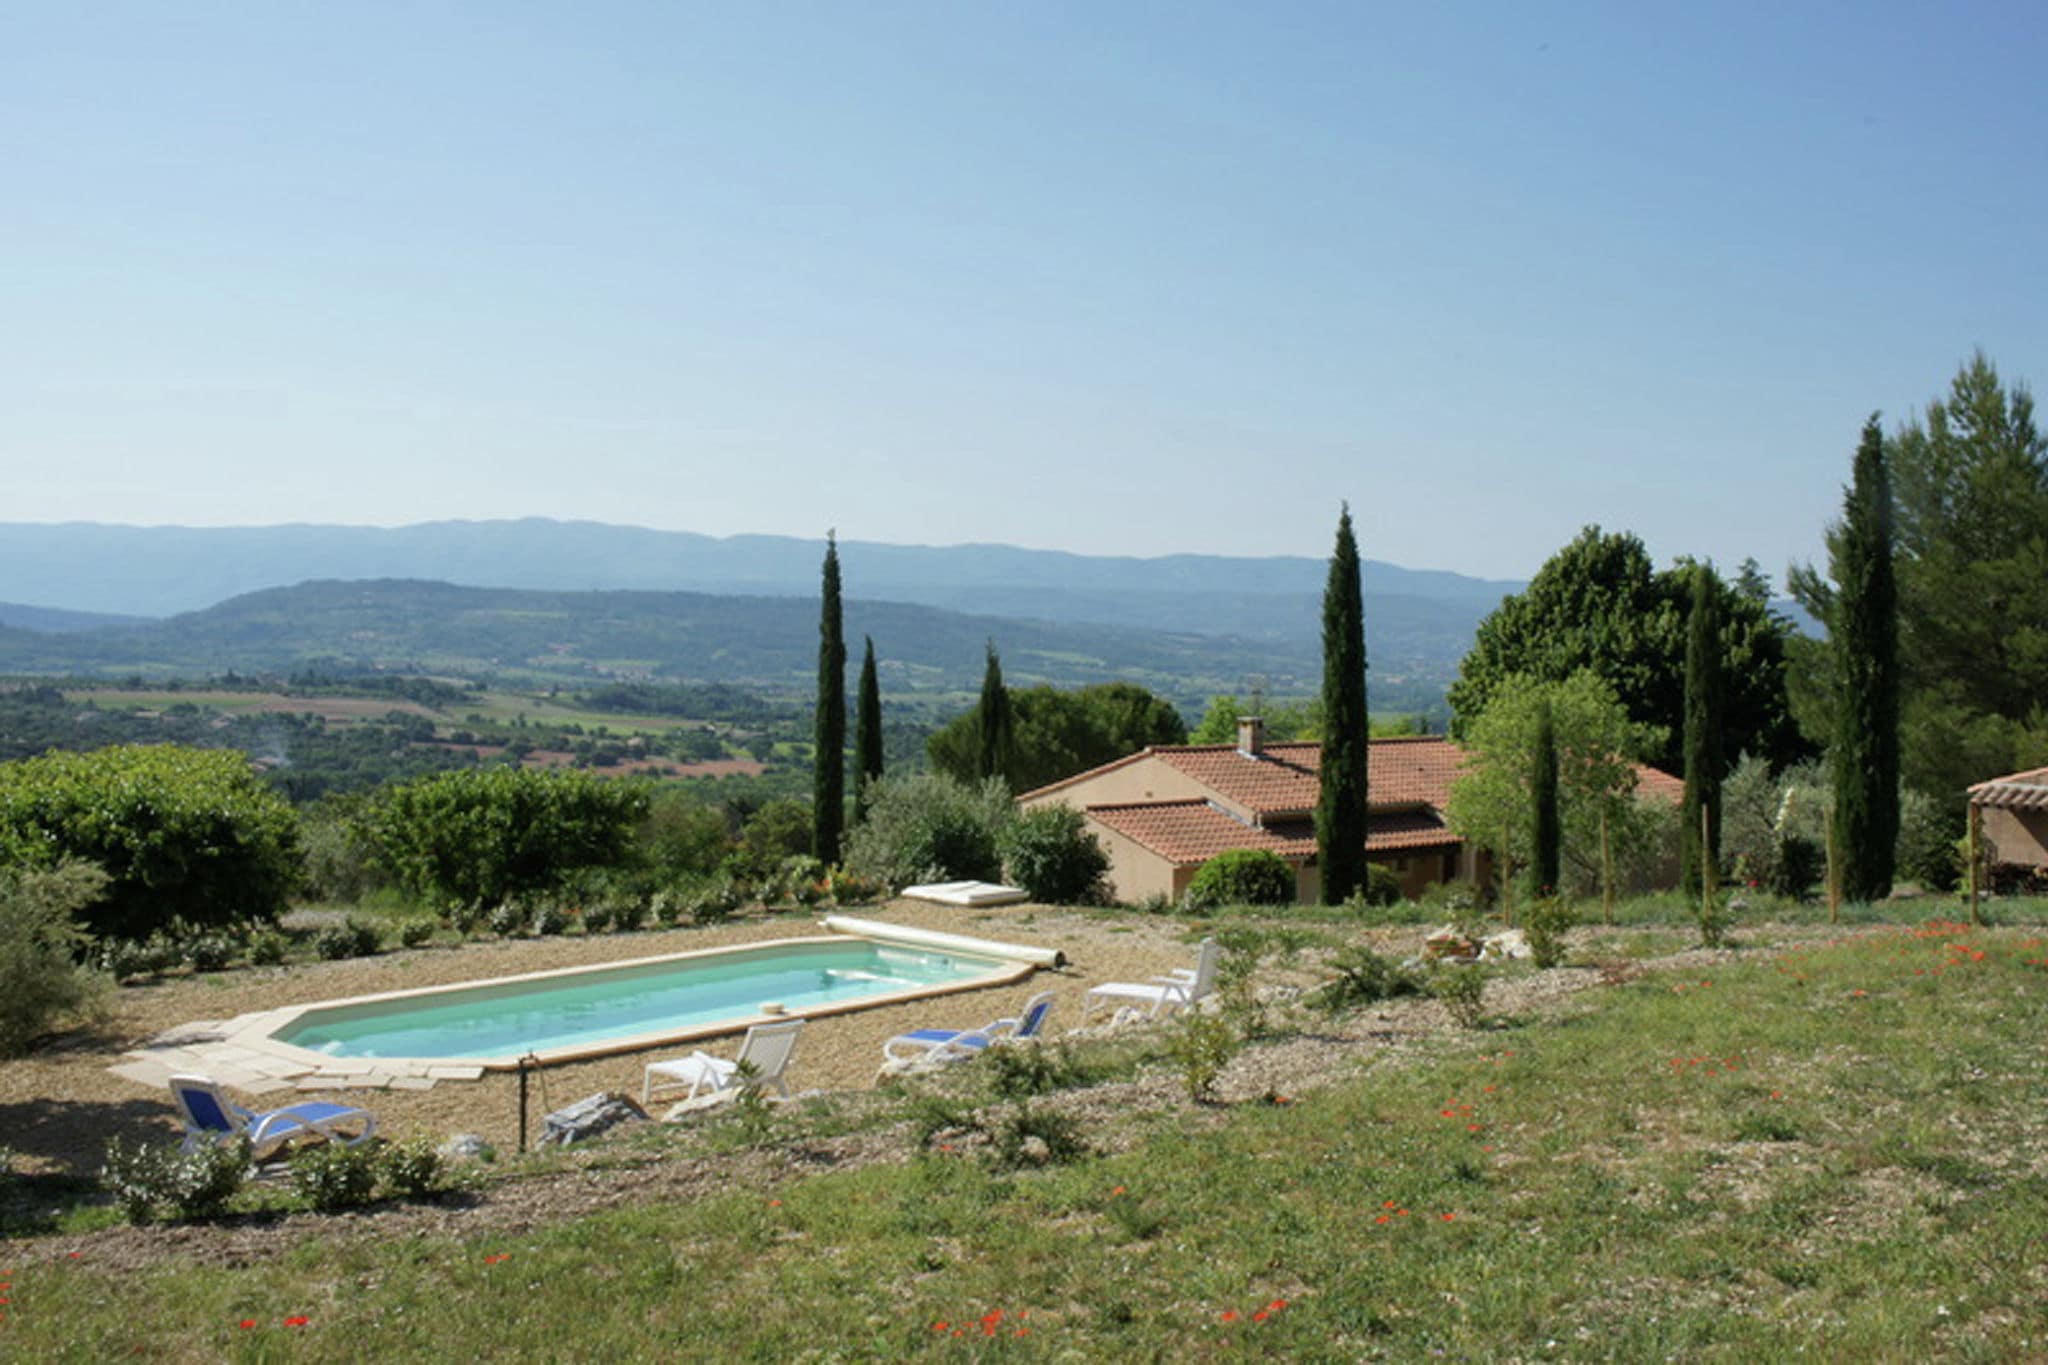 Lovely Holiday Home in Saint-Saturnin-lès-Apt with Pool